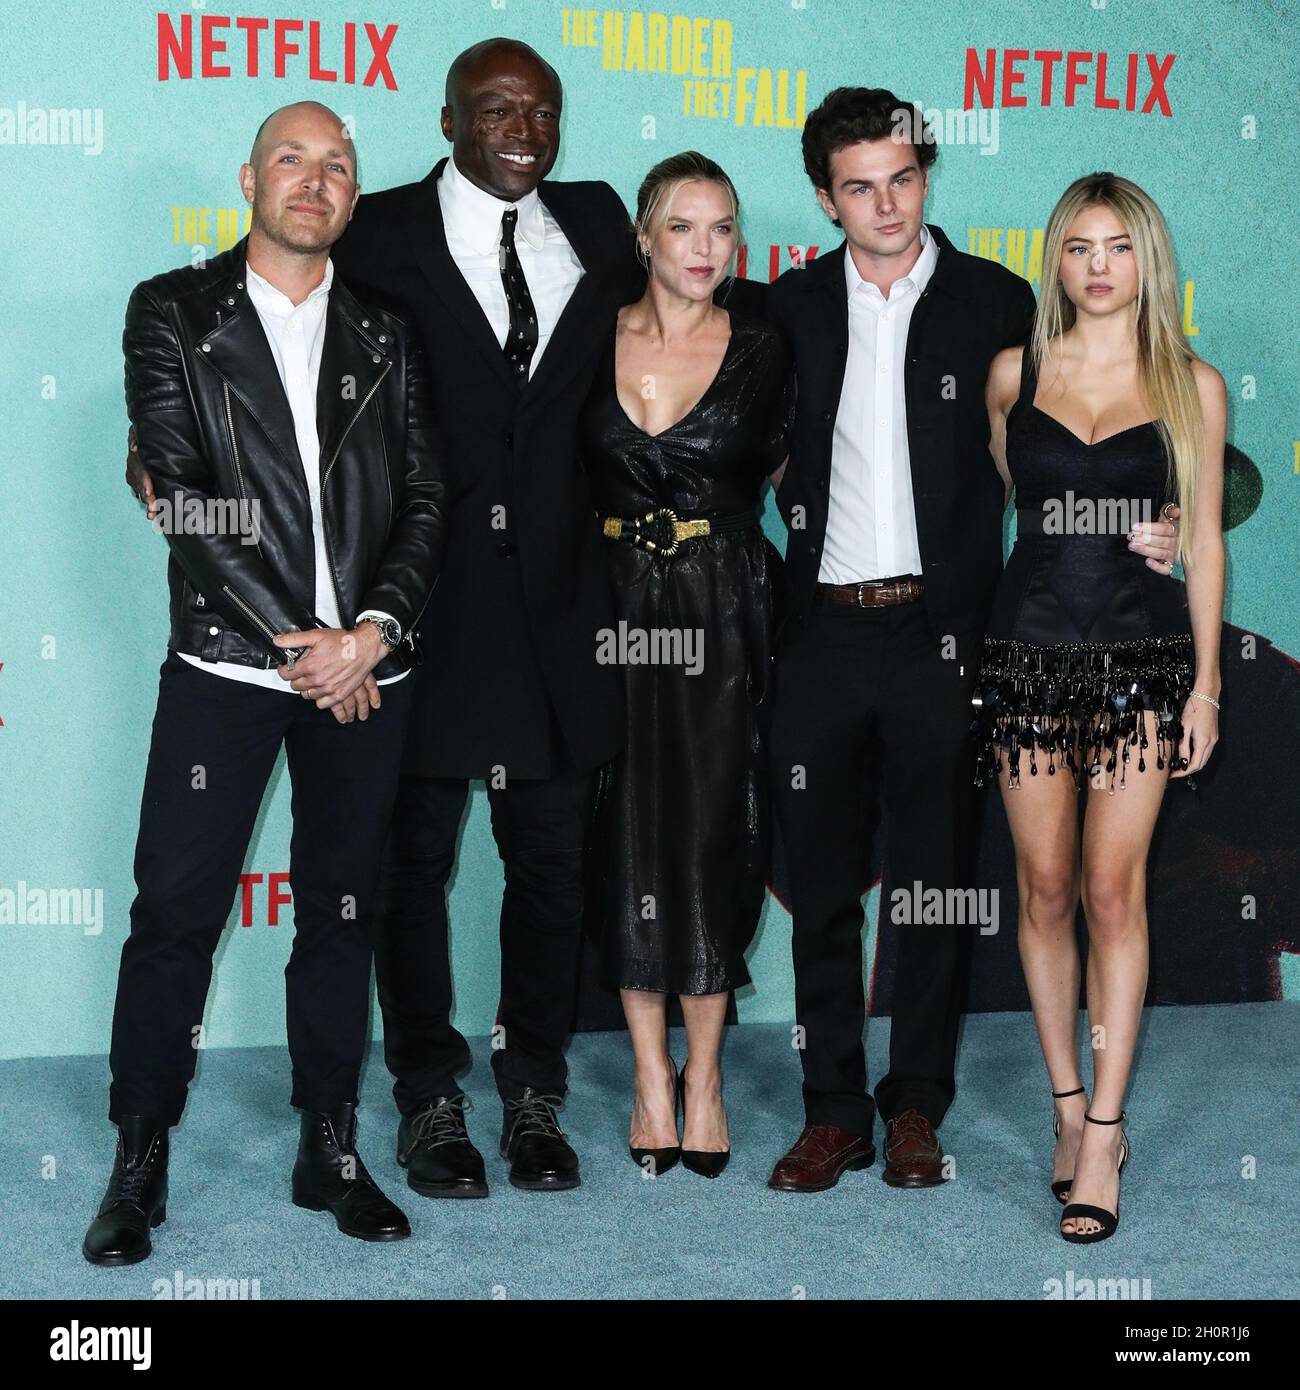 LOS ANGELES, CALIFORNIA, USA - OCTOBER 13: Singer-songwriter Seal (Henry Olusegun Adeola Samuel), girlfriend Laura Strayer, Aris Rachevsky and model Leni Olumi Klum arrive at the Los Angeles Premiere Of Netflix's 'The Harder They Fall' held at the Shrine Auditorium and Expo Hall on October 13, 2021 in Los Angeles, California, United States. (Photo by Xavier Collin/Image Press Agency) Stock Photo